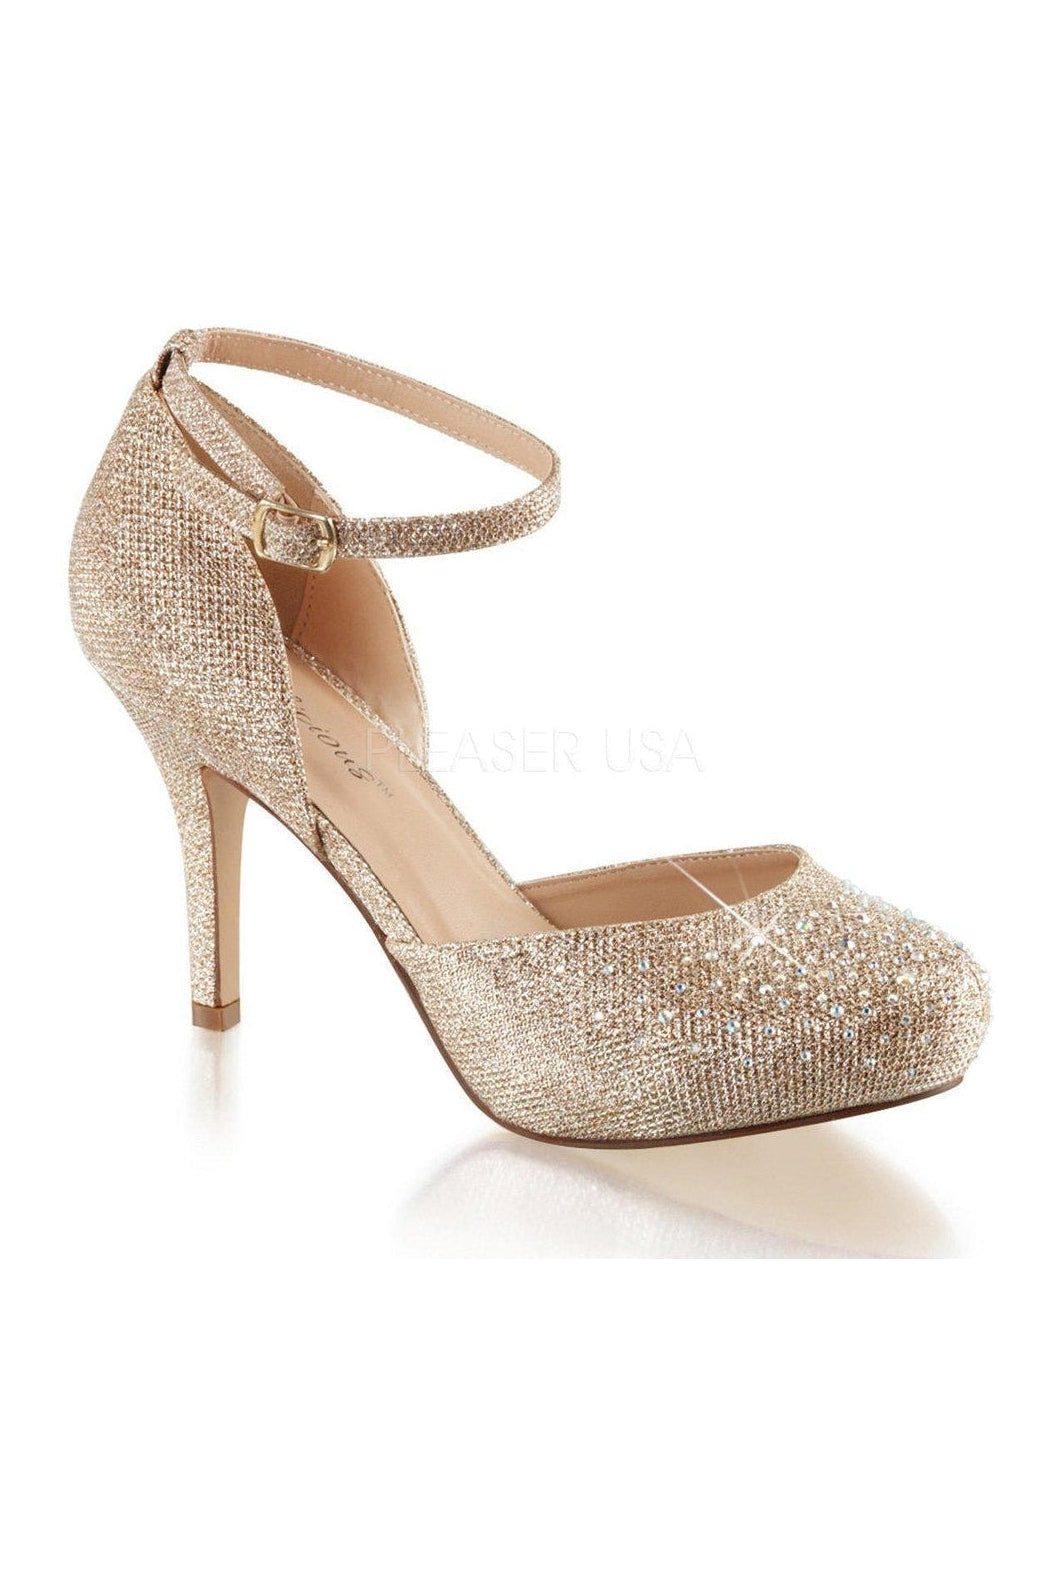 COVET-03 Pump | Nude Fabric-Fabulicious-Nude-Pumps-SEXYSHOES.COM